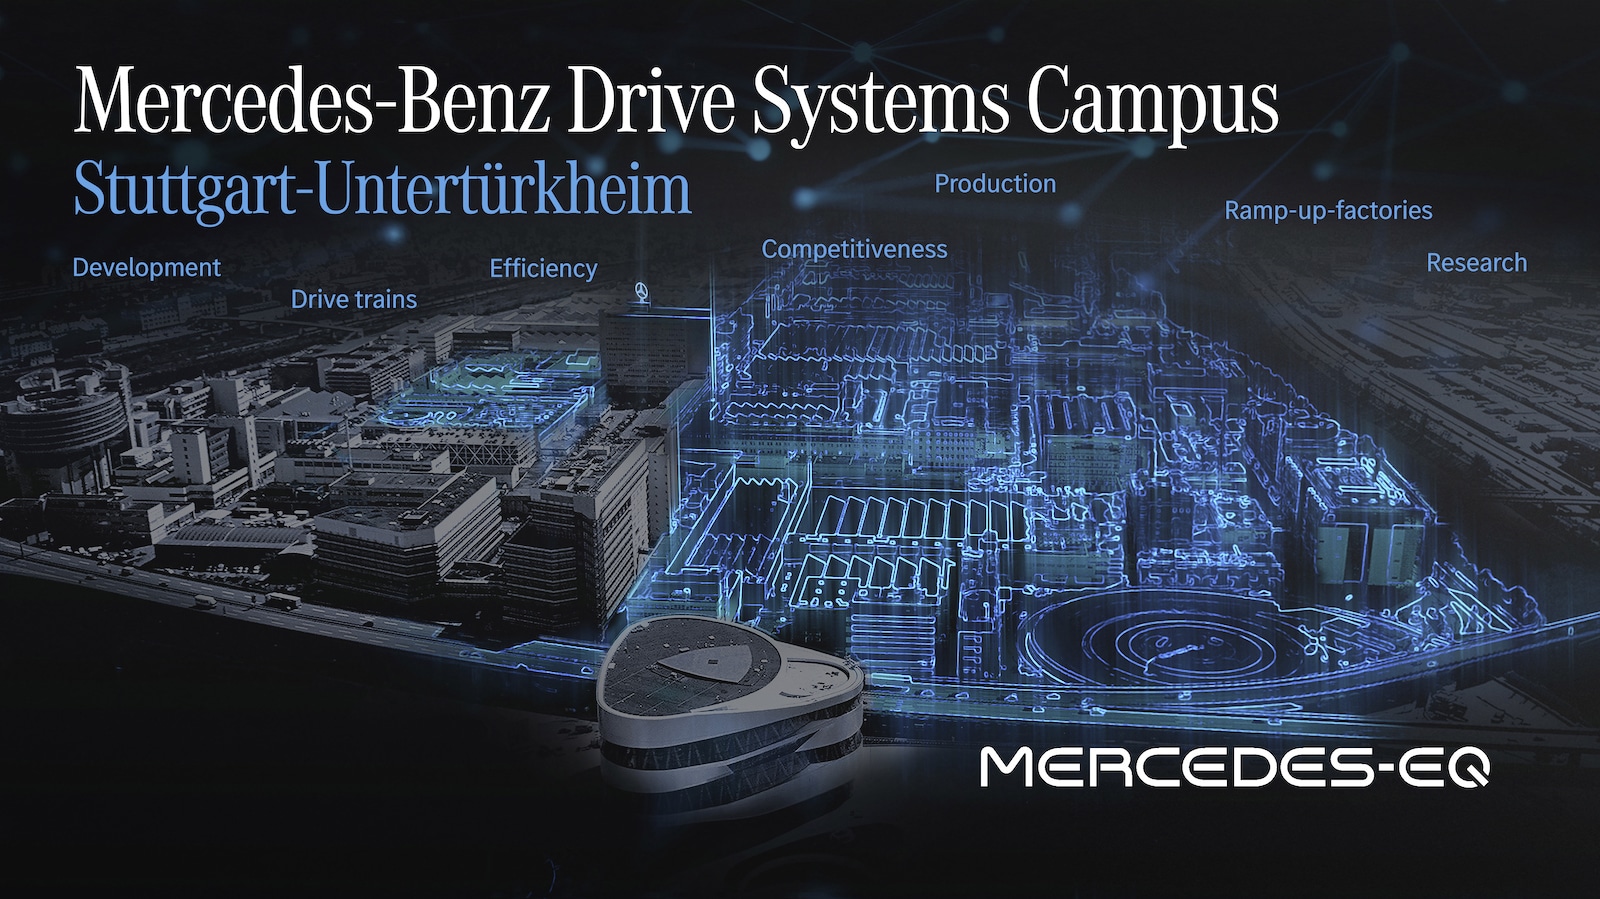 Mercedes Drive Systems Campus graphic